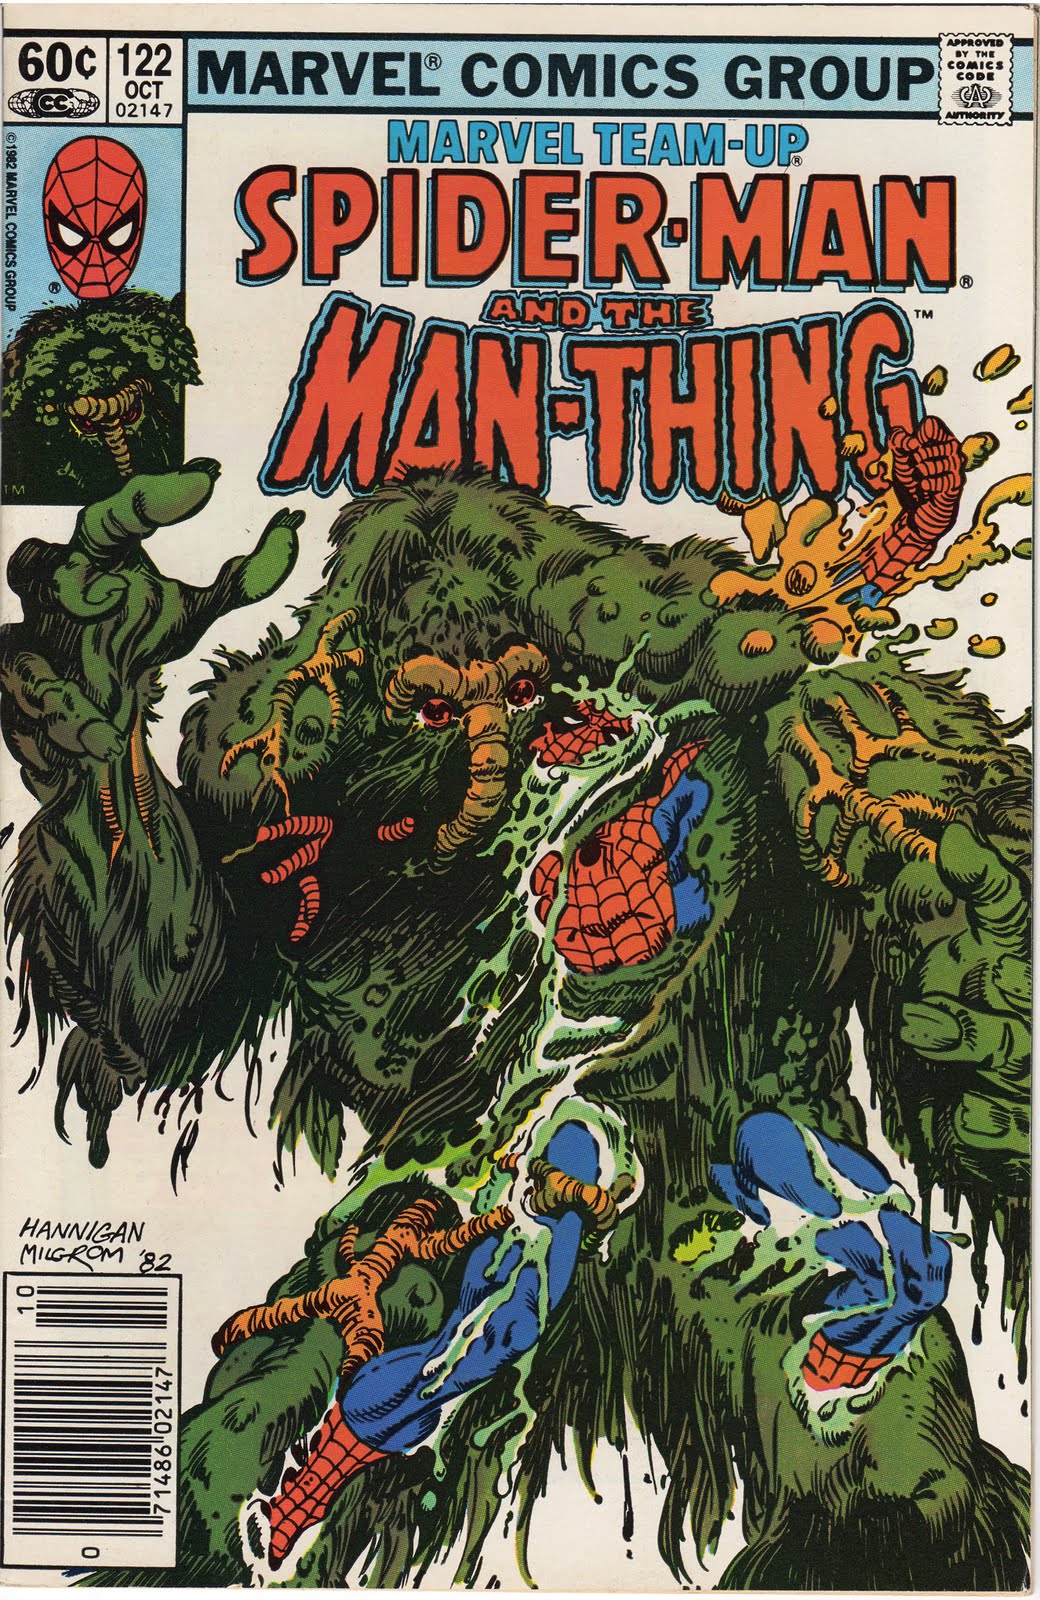 marvel team up 122 spider-man and man thing